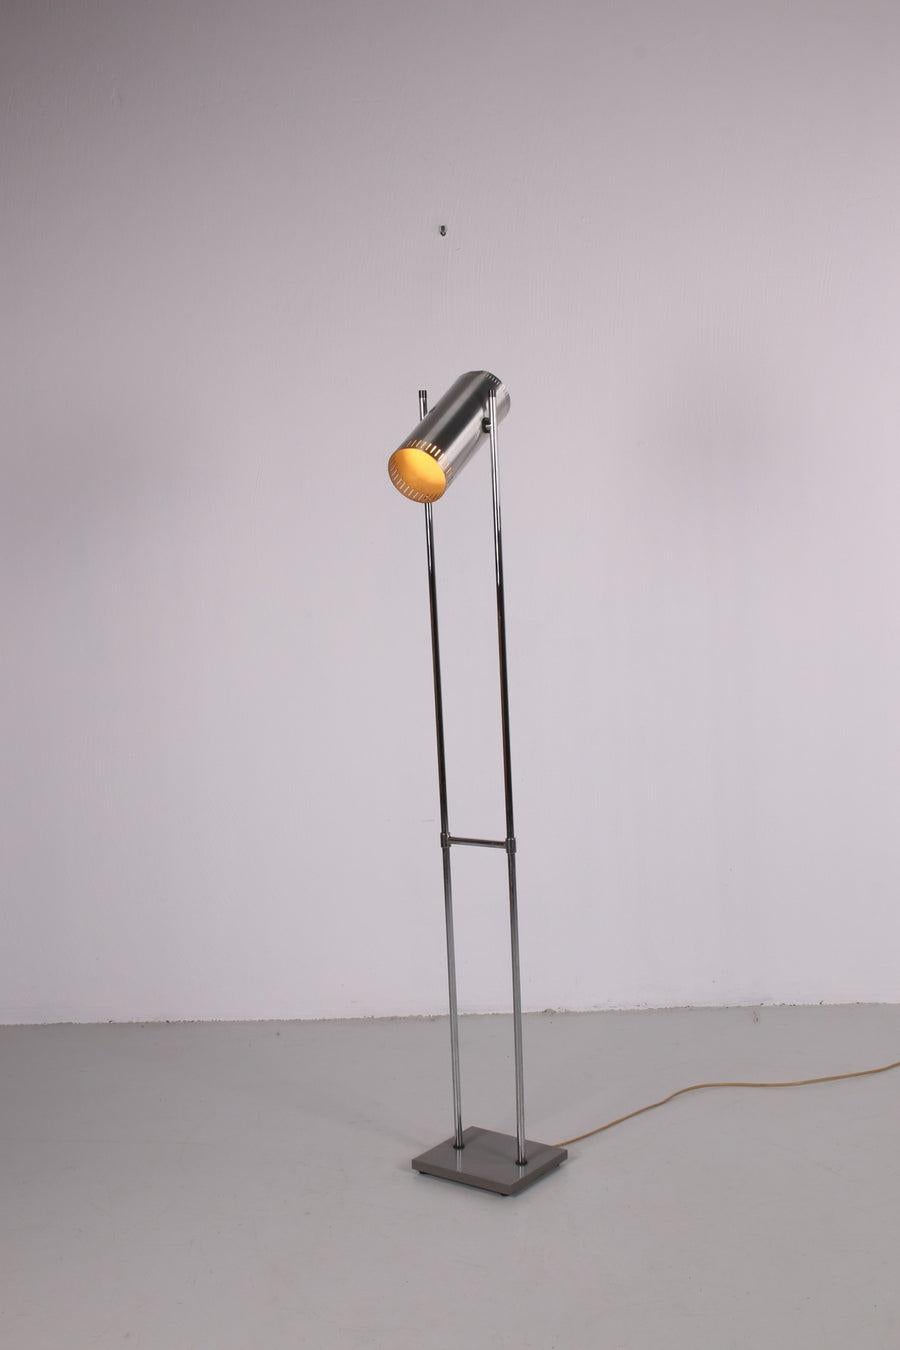 Trombone II, aluminum floor lamp by Jo Hammerborg for Fog & Mørup in 1966 - a 
beautiful Danish midcentury floor lamp in very good vintage condition.

A sleek shaped floor lamp with a square gray lacquered metal base, from where two aluminum